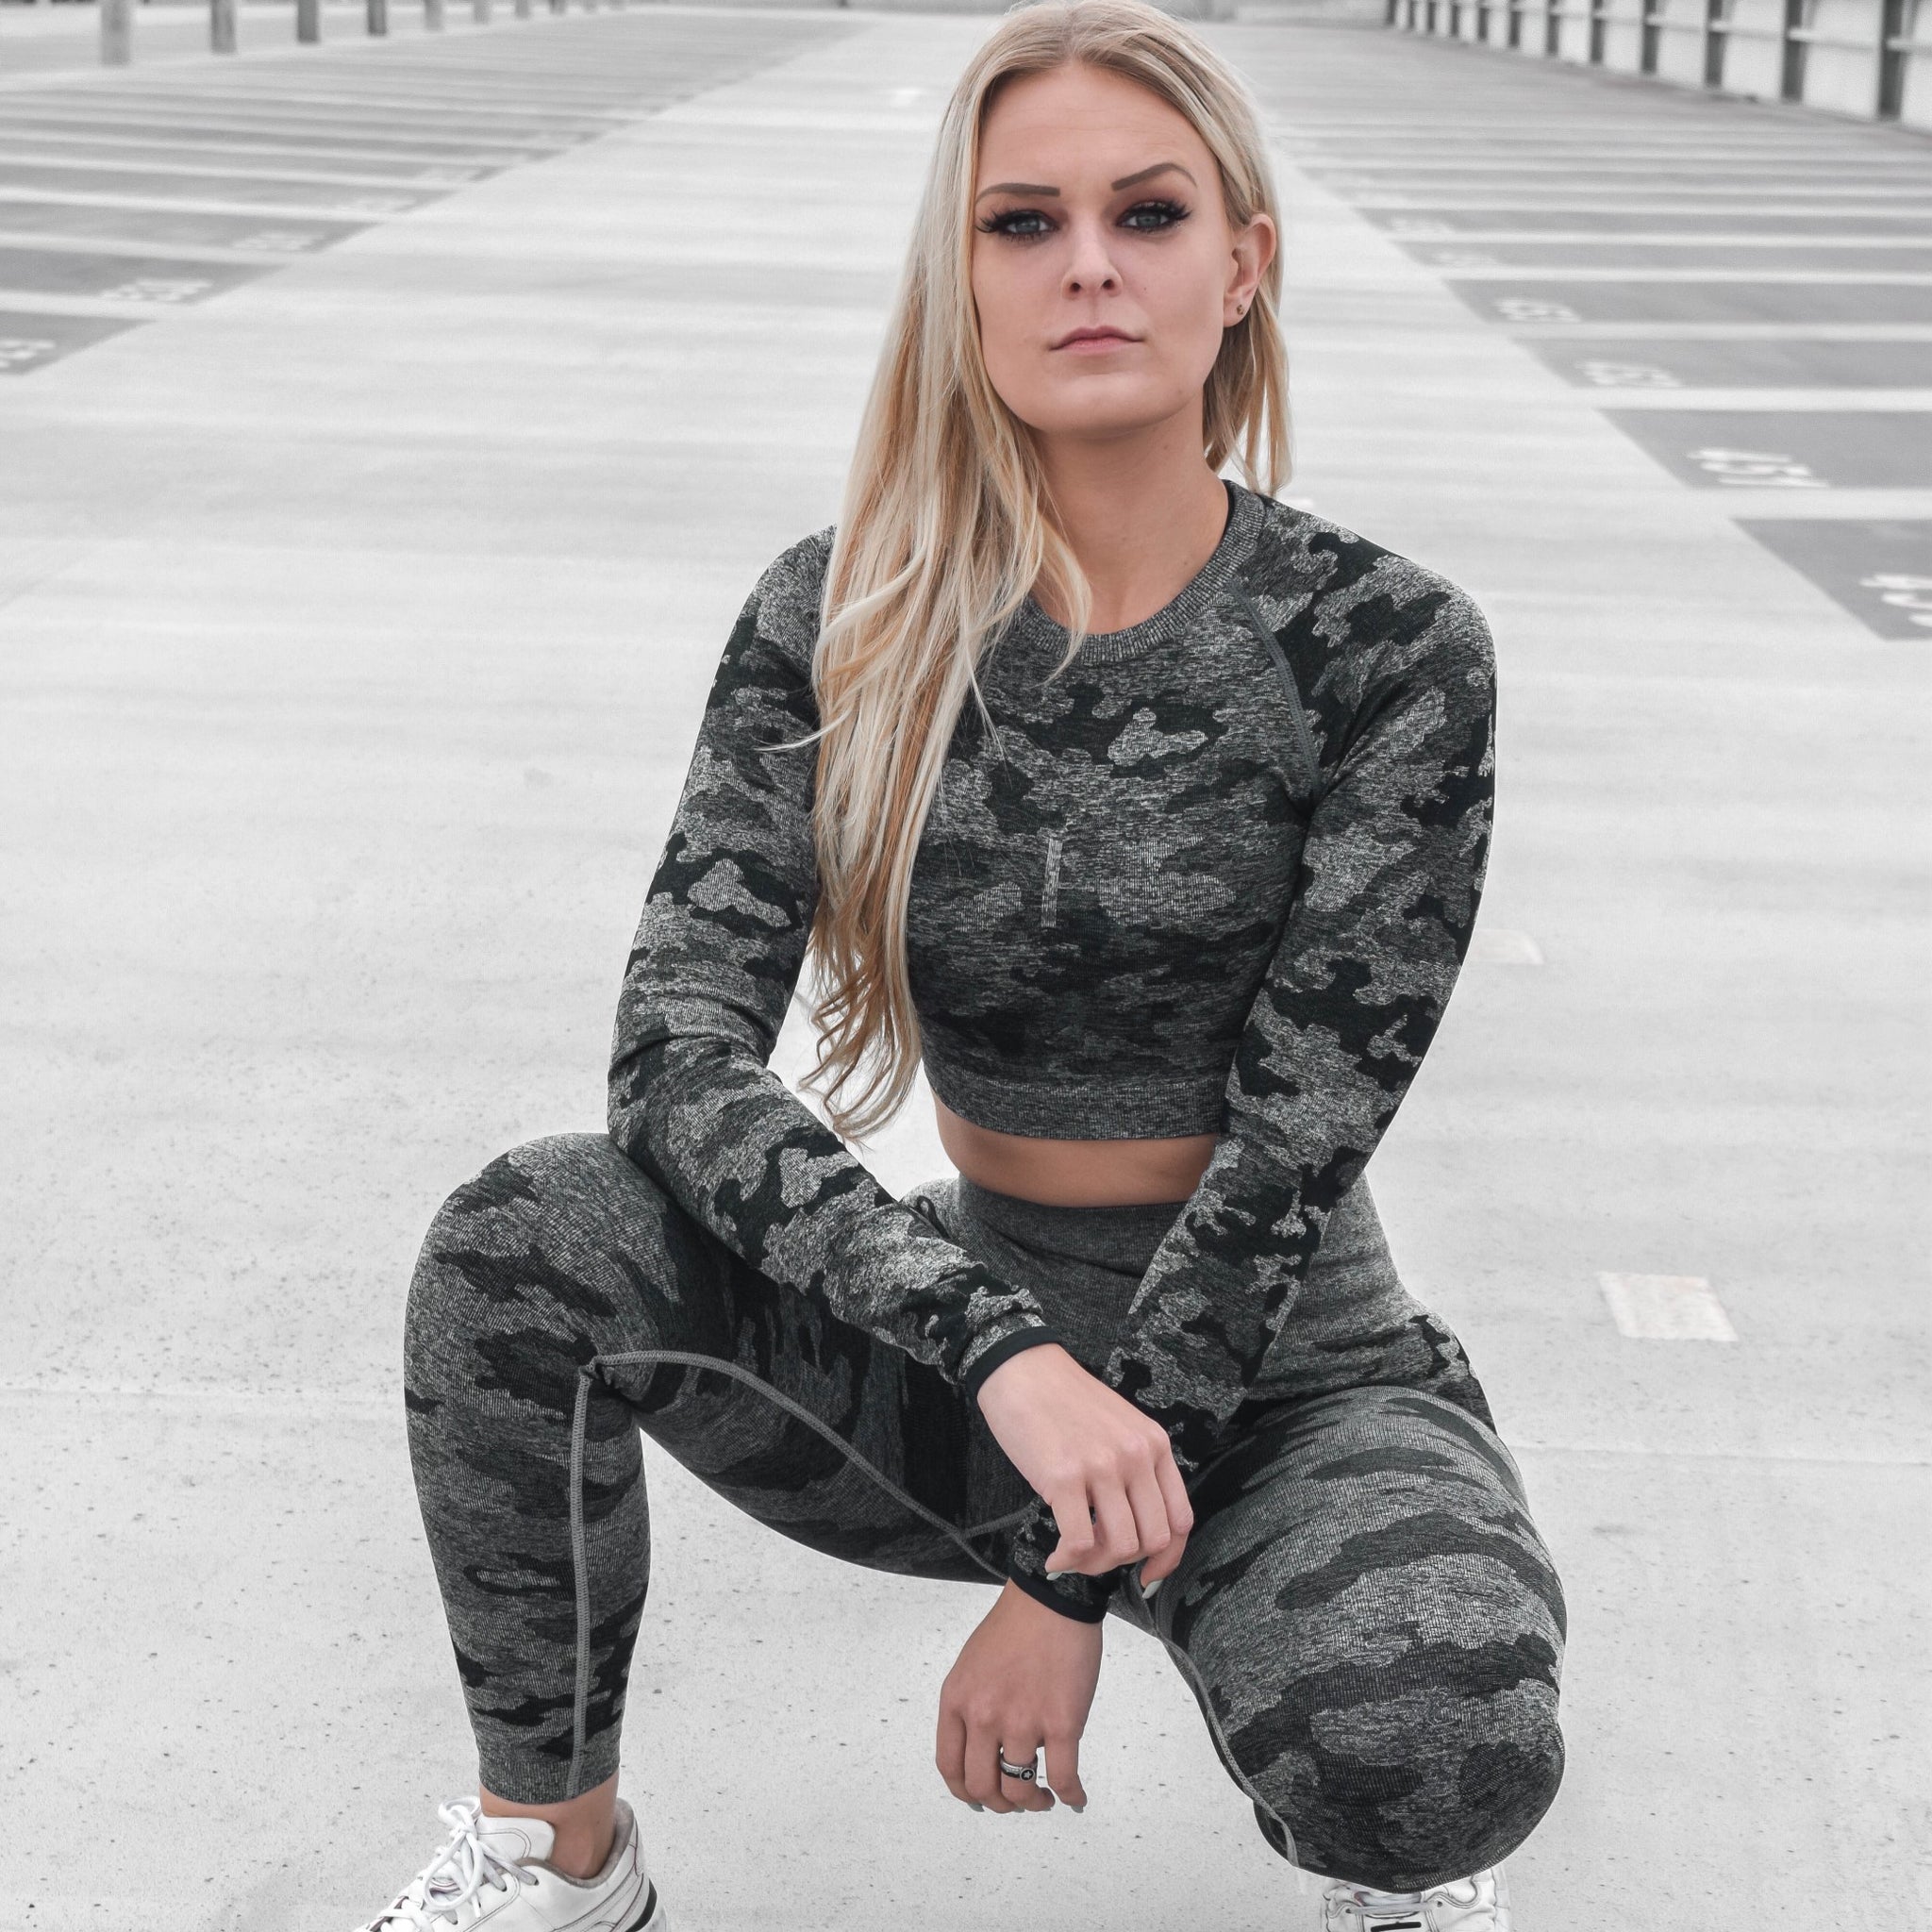 Workout Ready Camo Print Tights